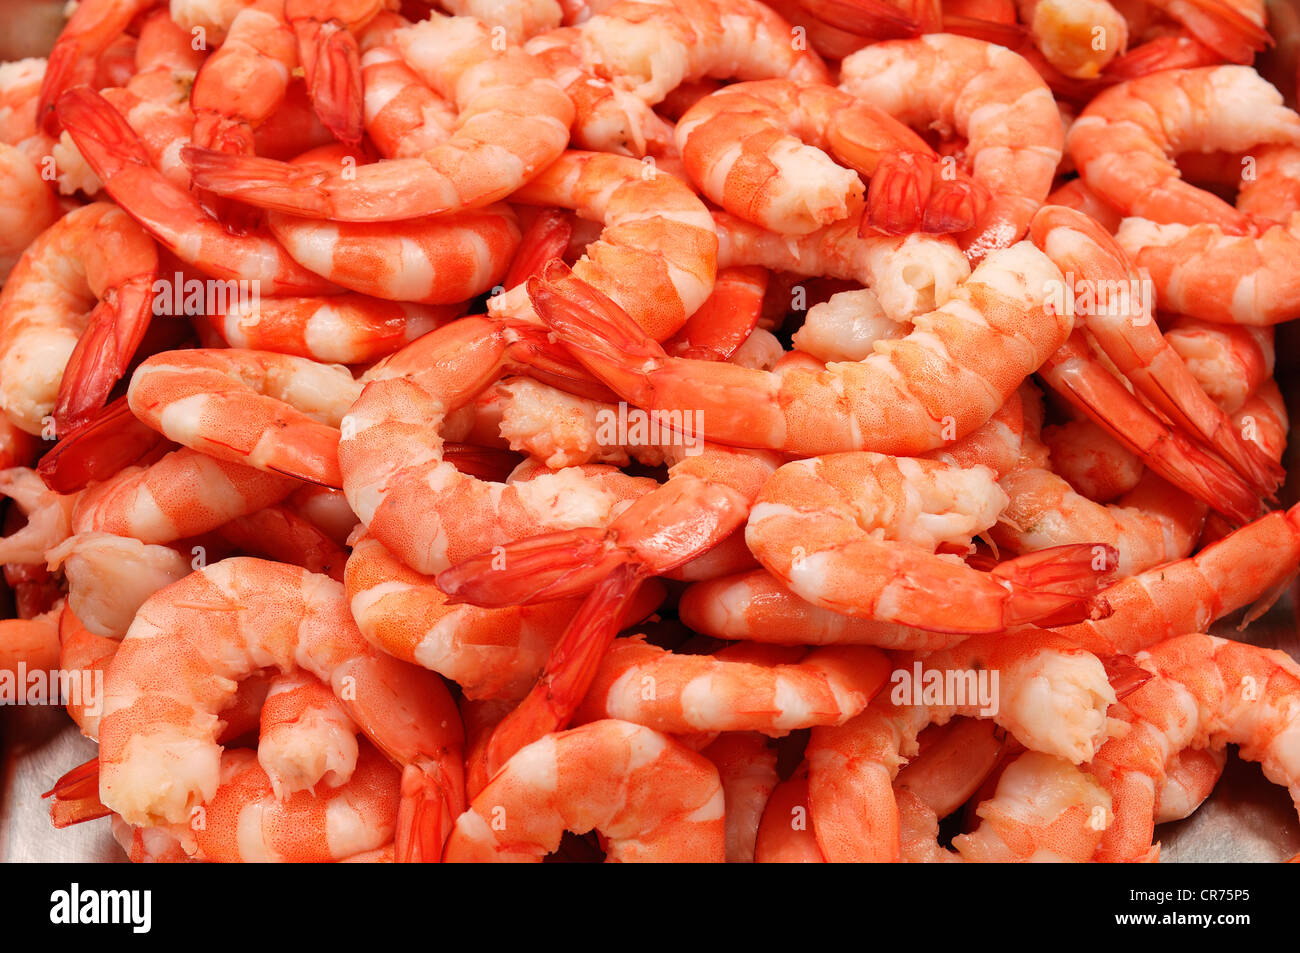 Freshly cooked crystal red shrimps (Caridina cf. cantonensis var. Crystal Red), food Stock Photo